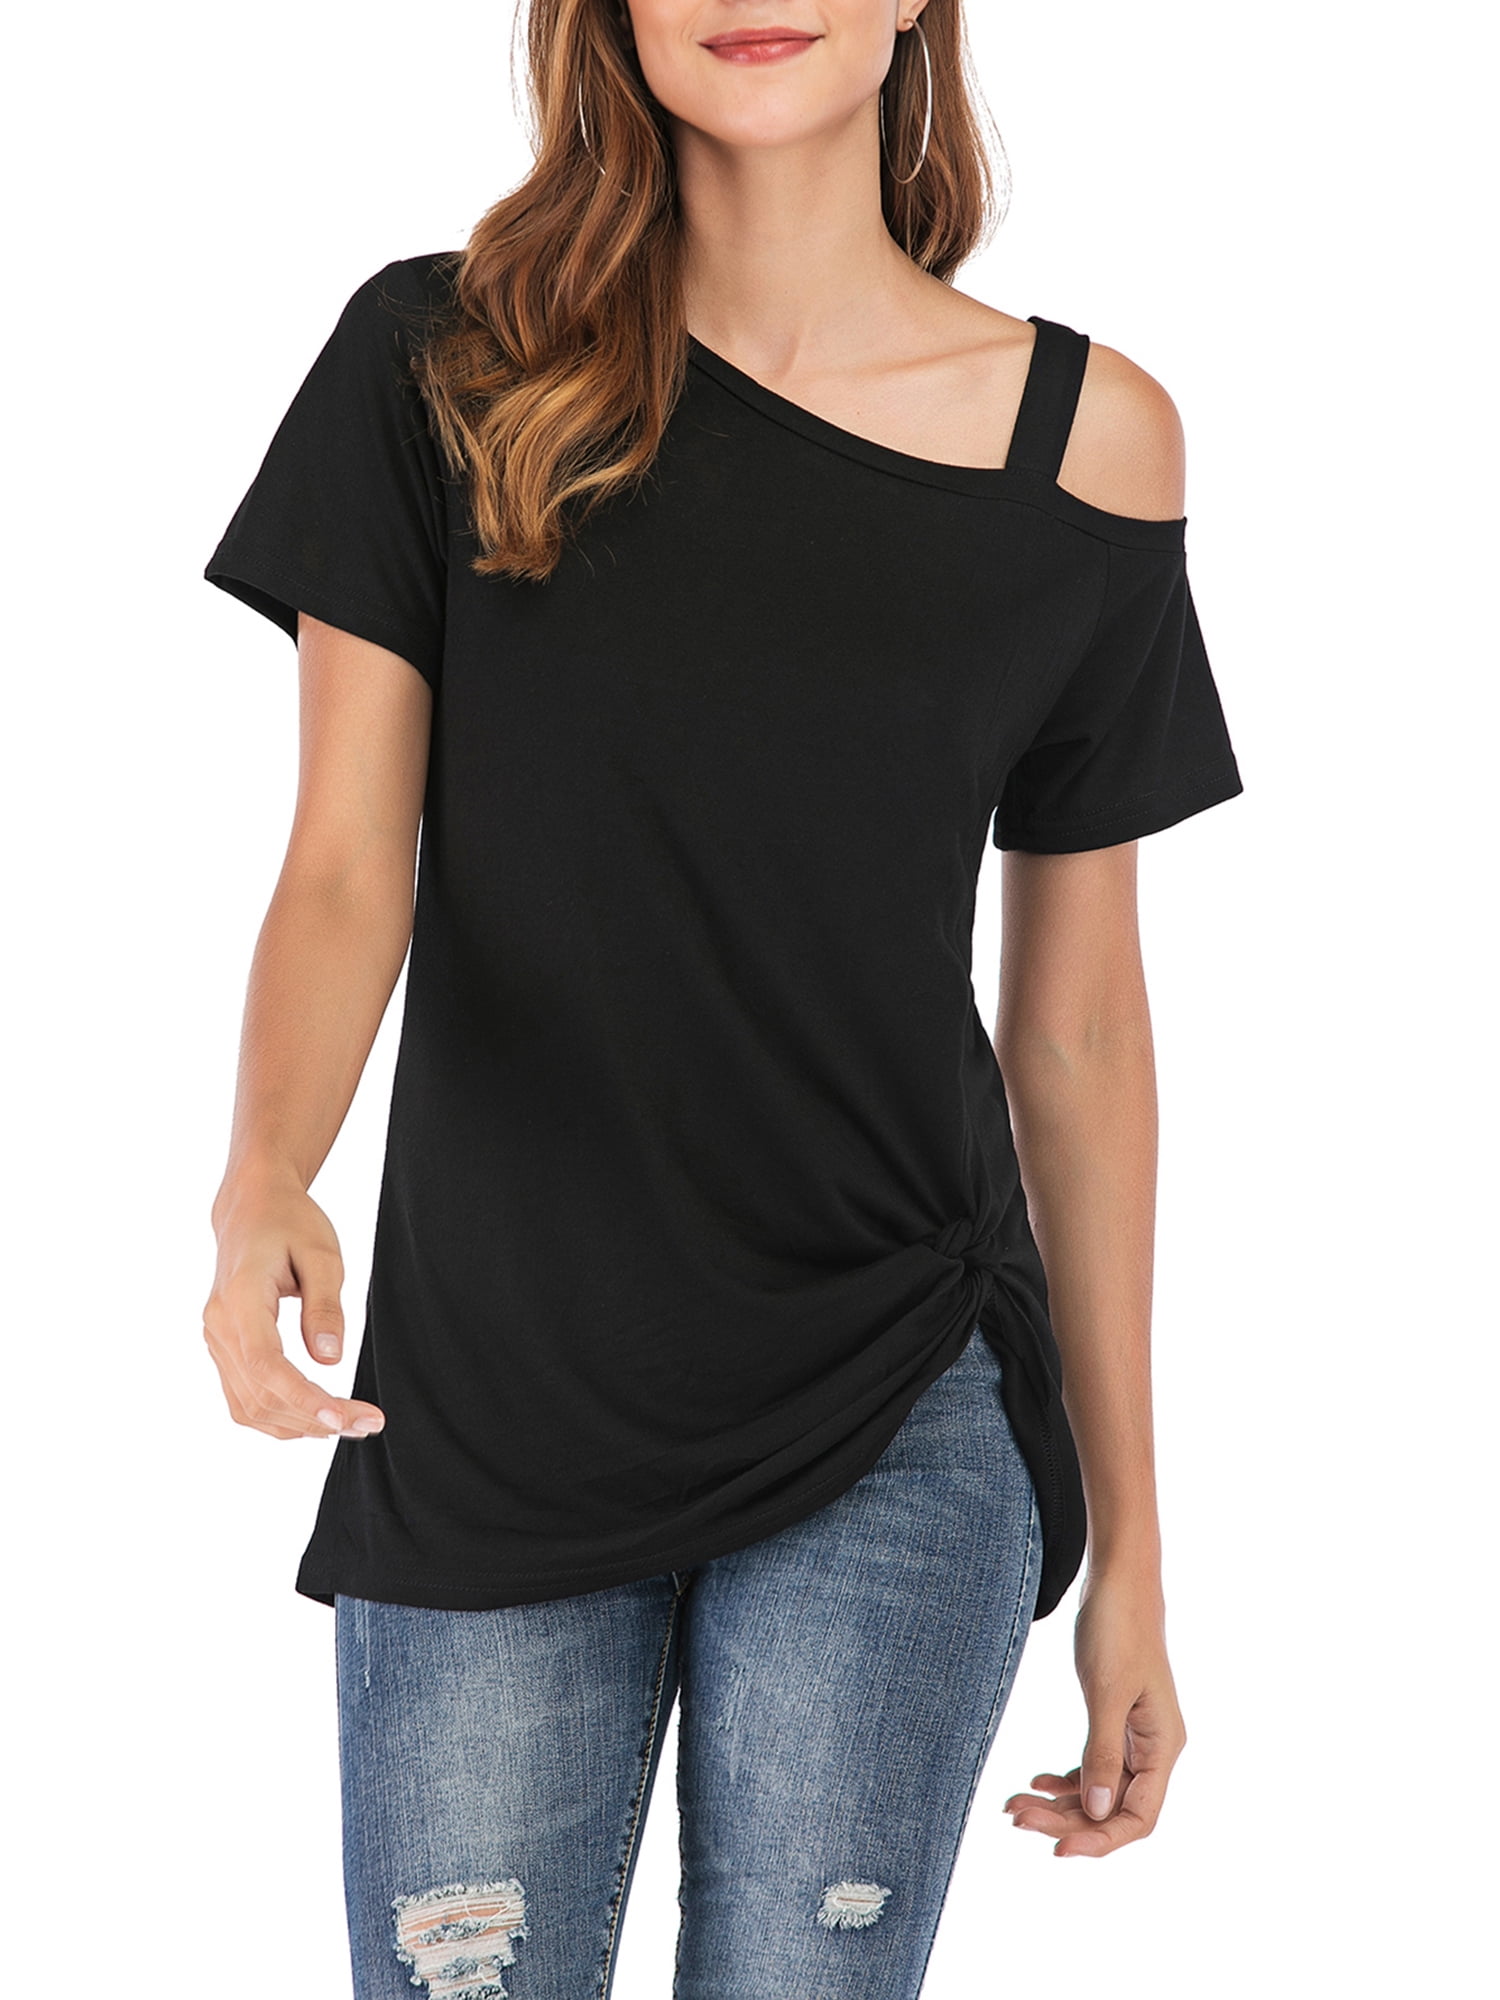 ✔ Hypothesis_X ☎ Short Sleeve Top Cross Strappy Cold Shoulder Tops Blouses Women Summer T-Shirt 